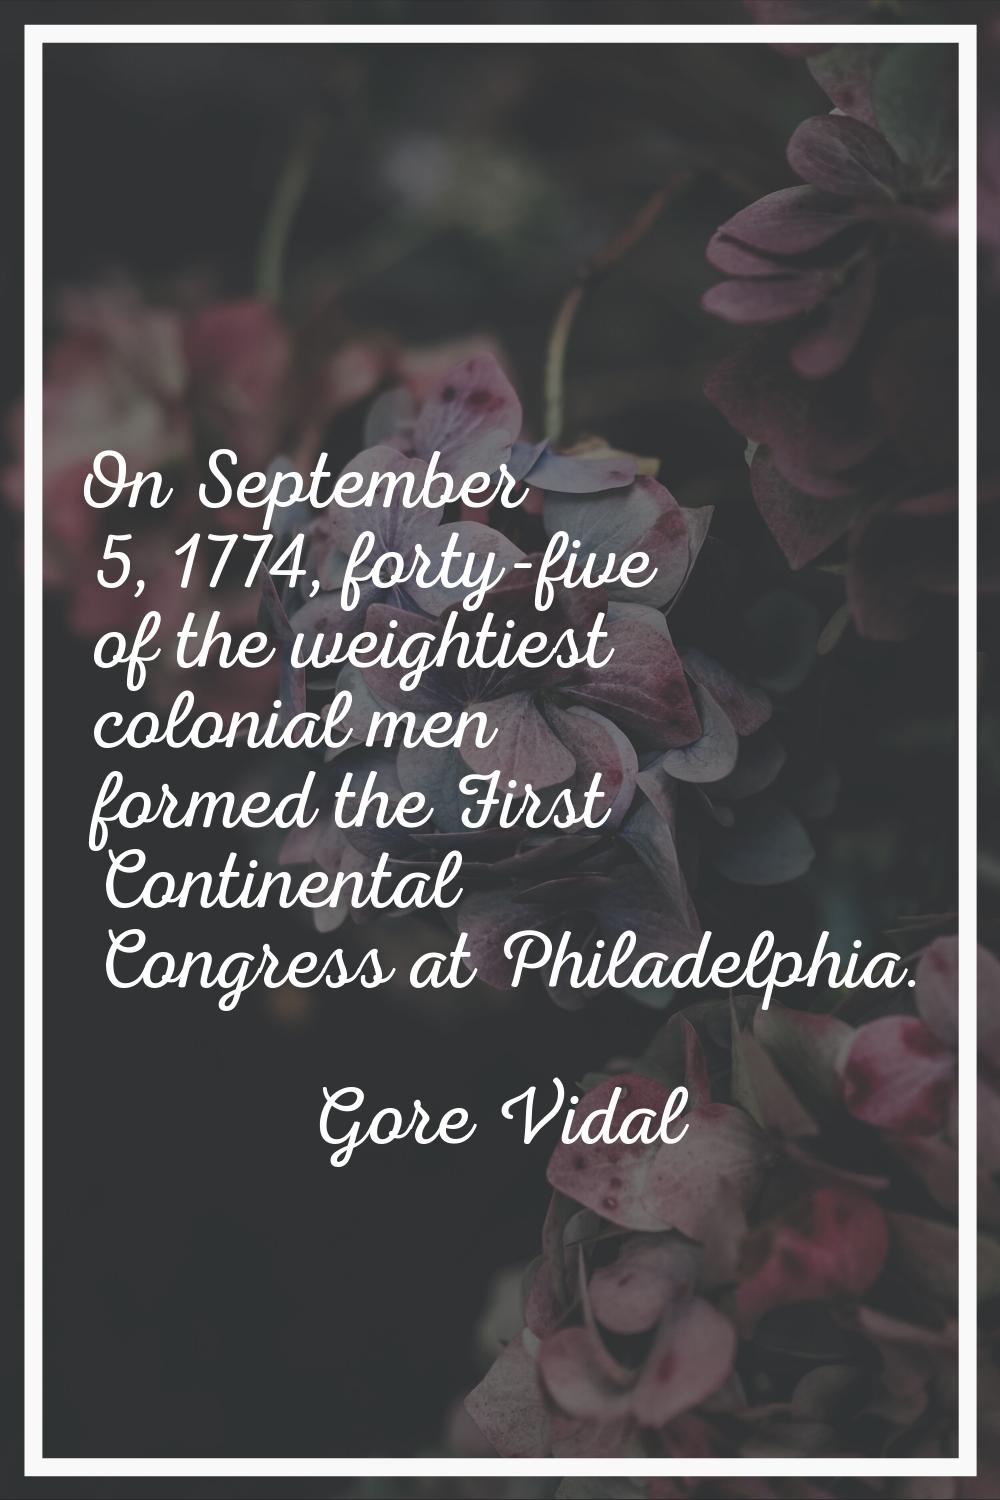 On September 5, 1774, forty-five of the weightiest colonial men formed the First Continental Congre